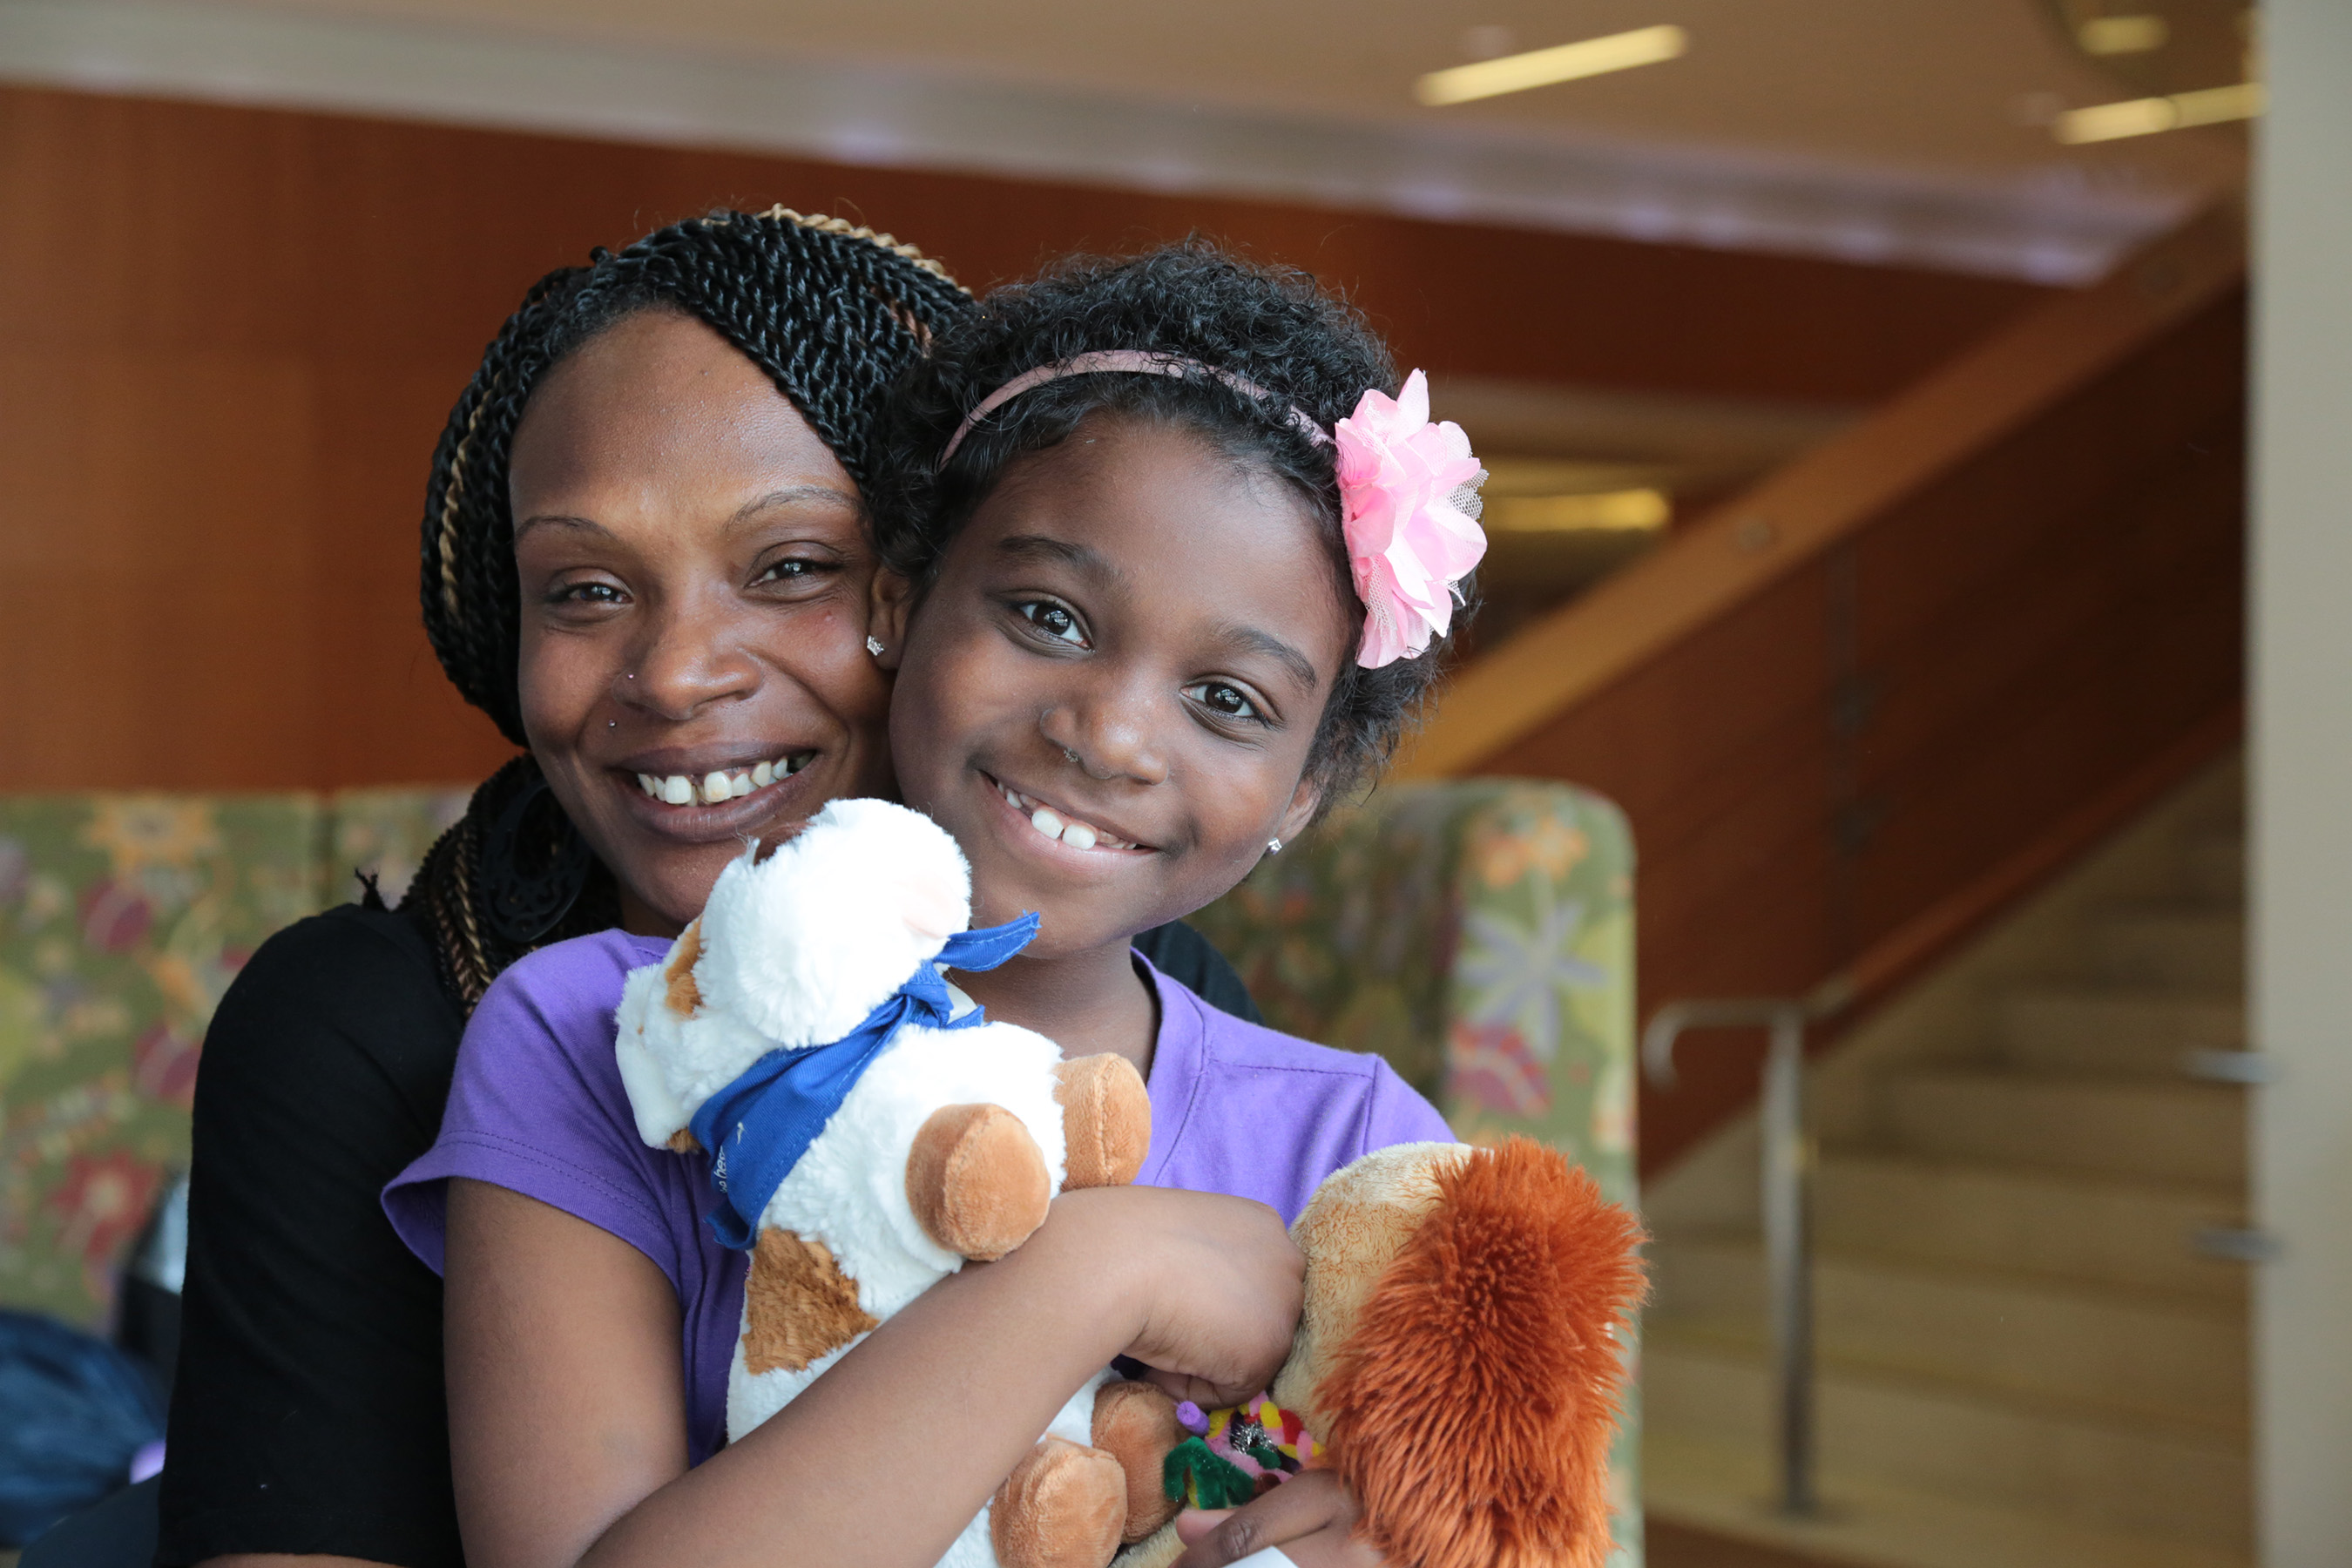 Fonta Taylor of Beloit, Wisconsin, is one of eight mothers that Northwestern Mutual, through its Foundation, will honor this Mother’s Day.